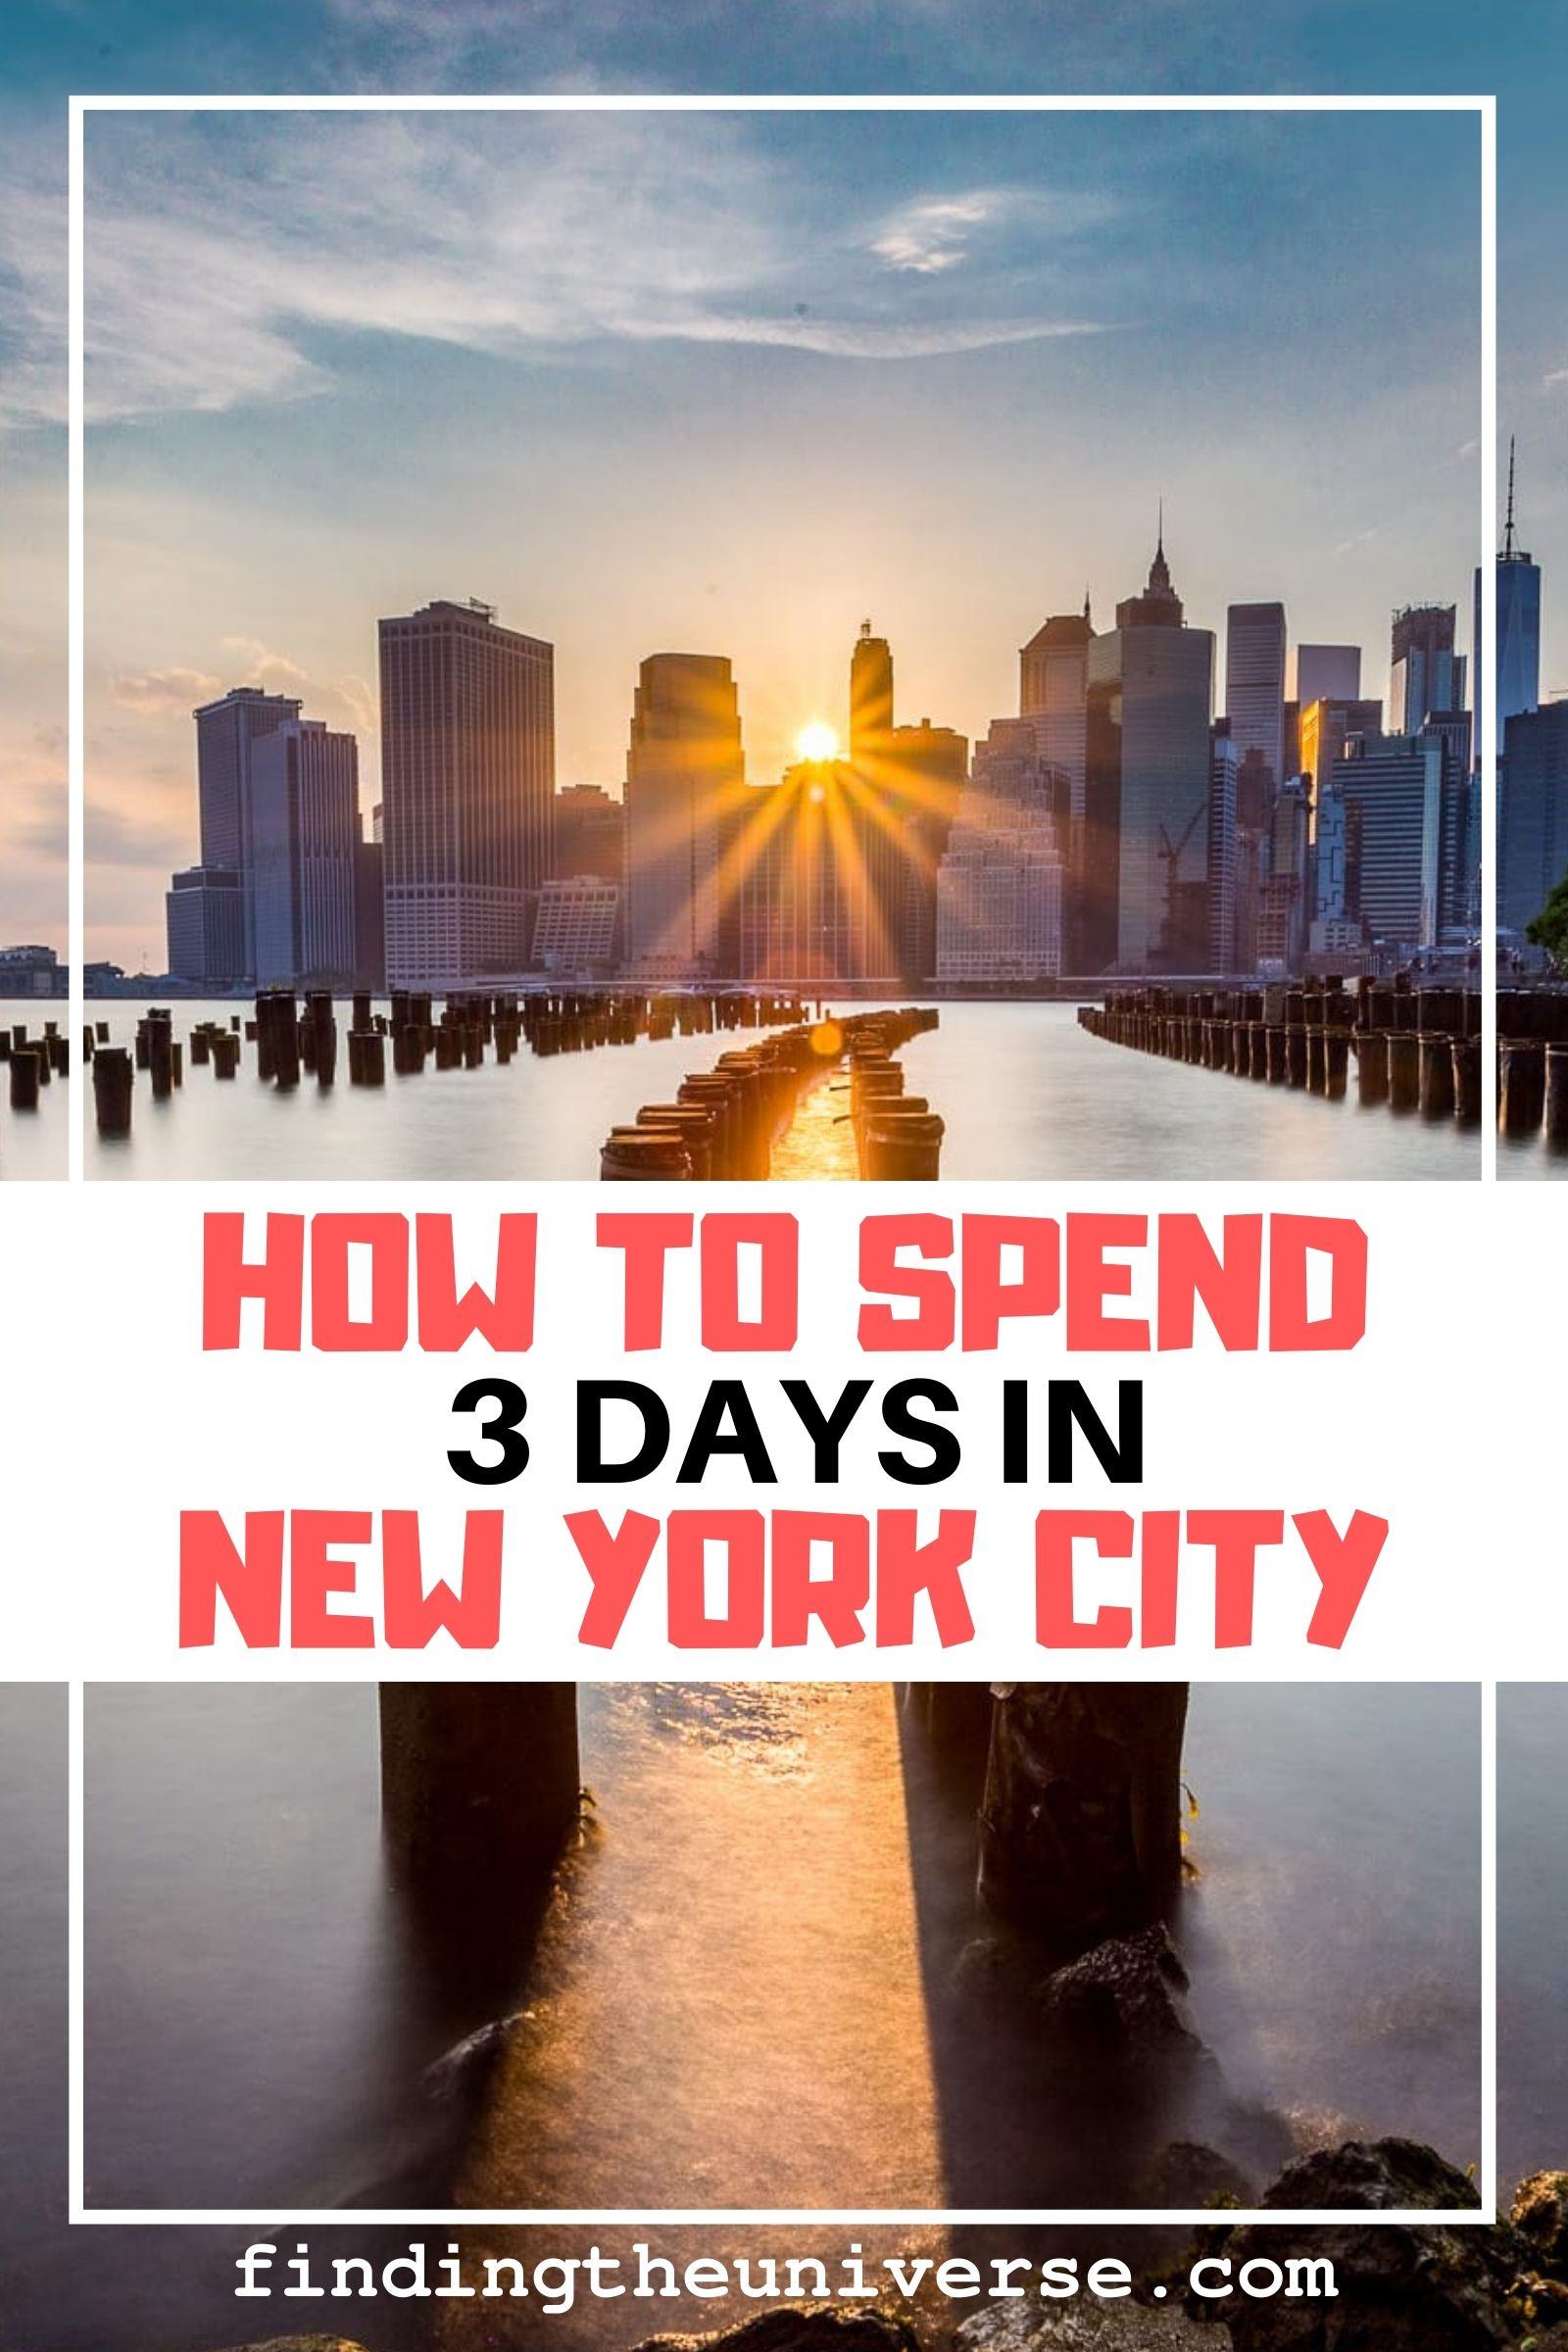 A detailed guide to spending 3 days in New York. With a day-by-day itinerary, tips on how to get around, where to stay and save money in NYC!